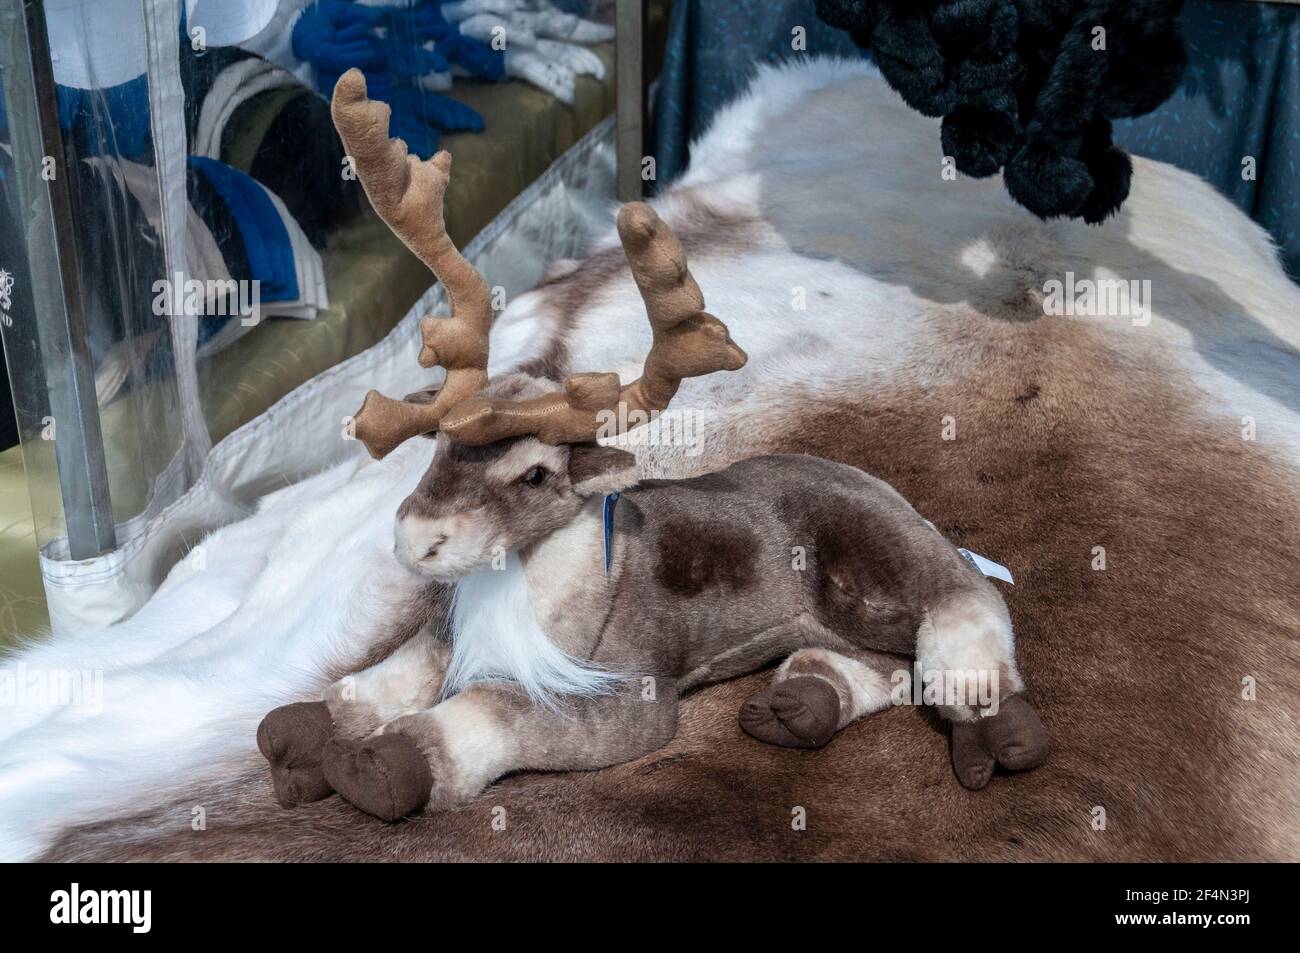 A Reindeer toy mascot on Finnish Reindeer skins on sale at a stall on Kauppatori (Market Square & Market Hall) on the harbour front in Helsinki, Finland Stock Photo